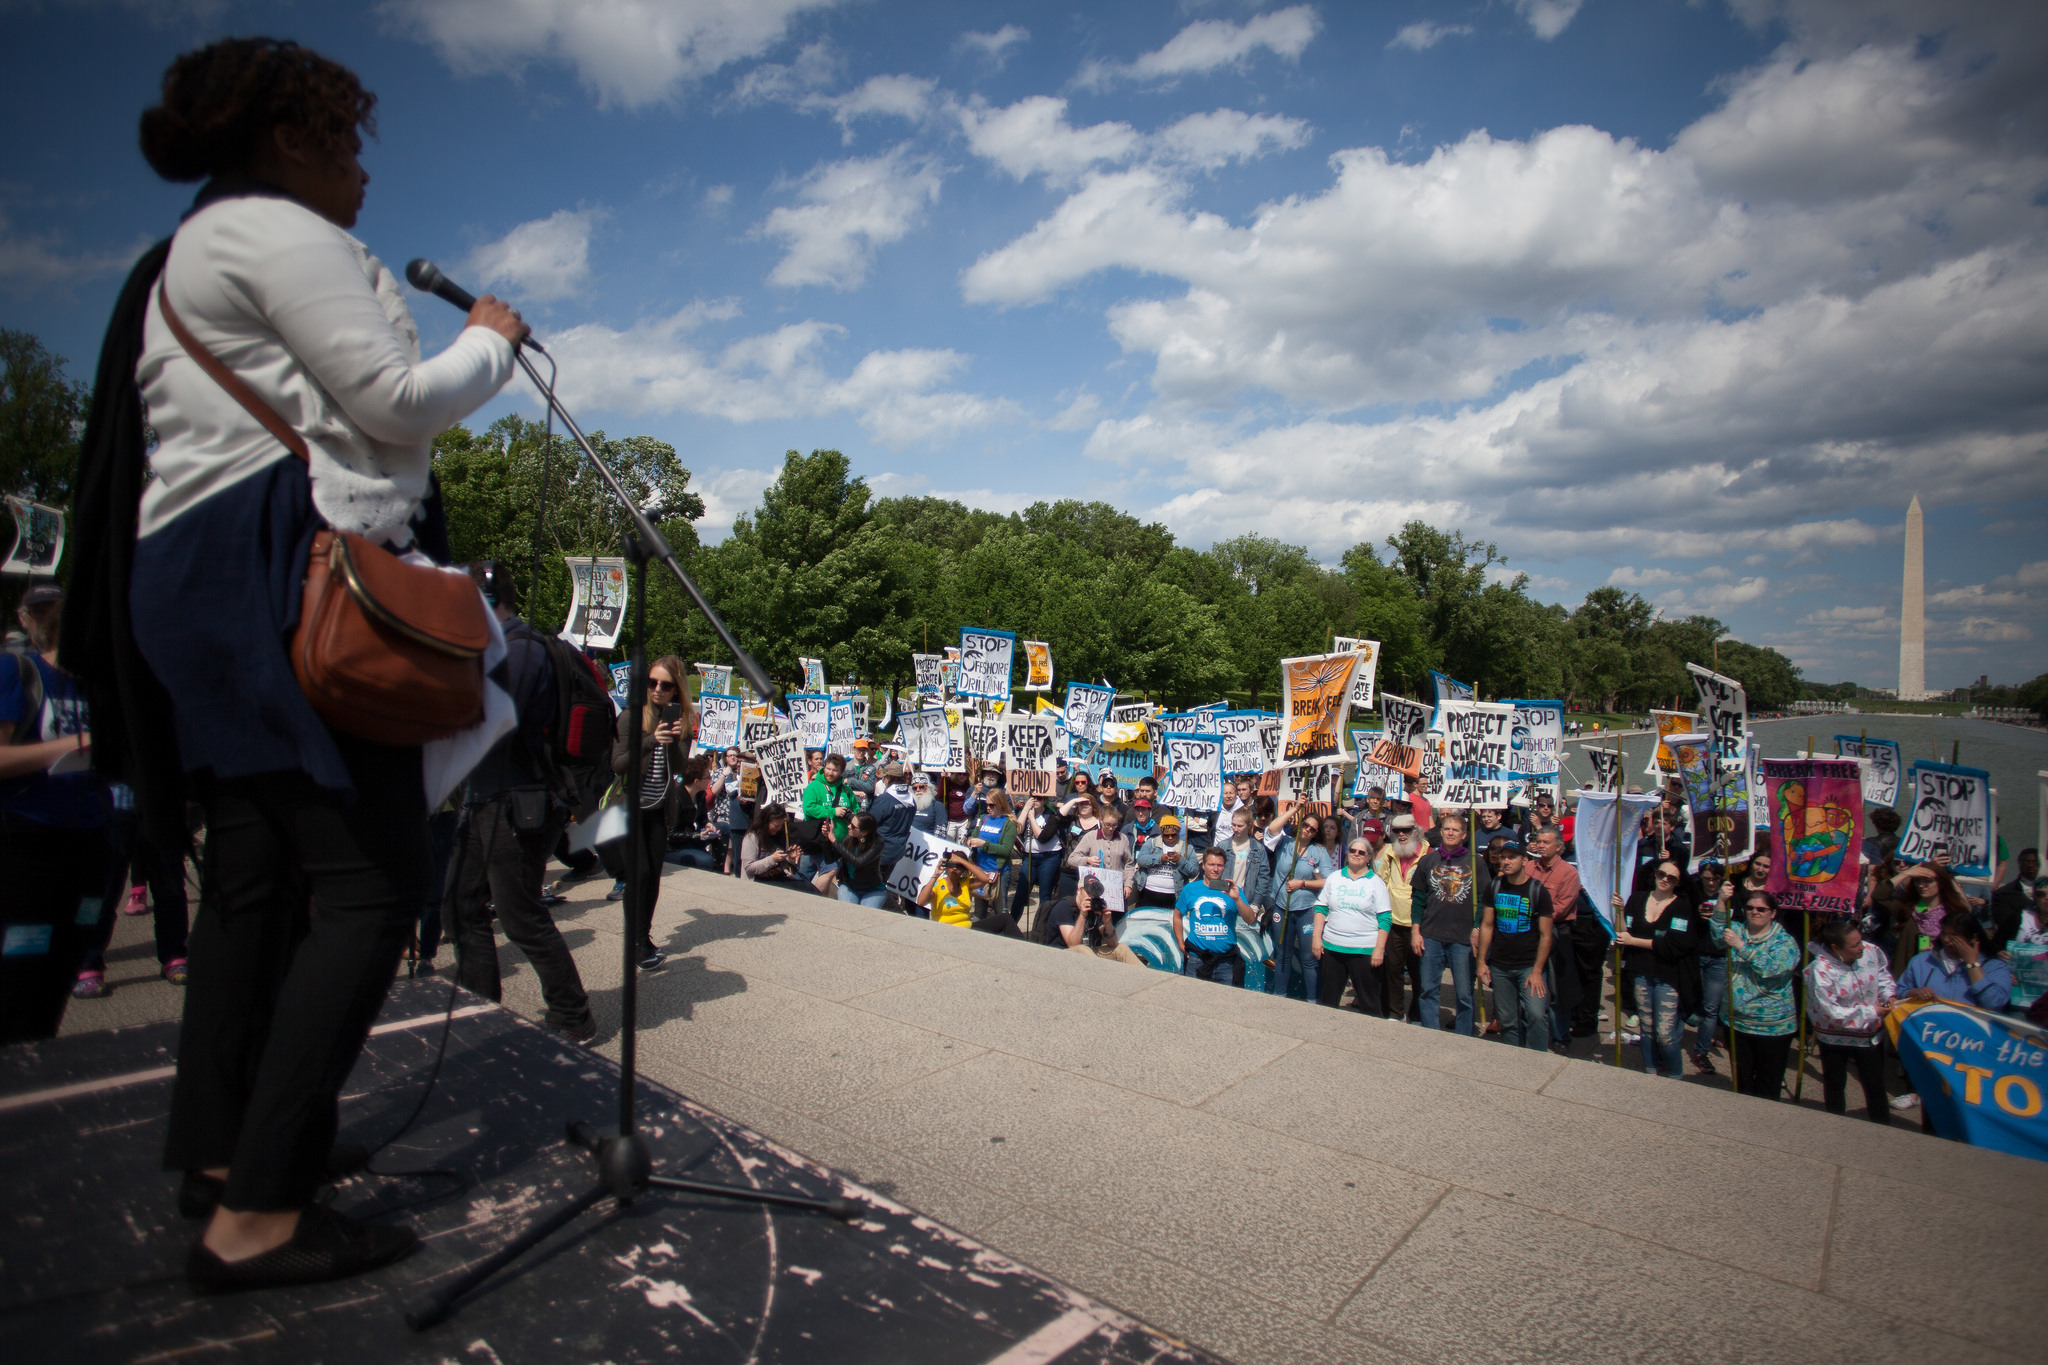 Speaker at the Break Free action in D.C. in front of activists and the reflecting pool.